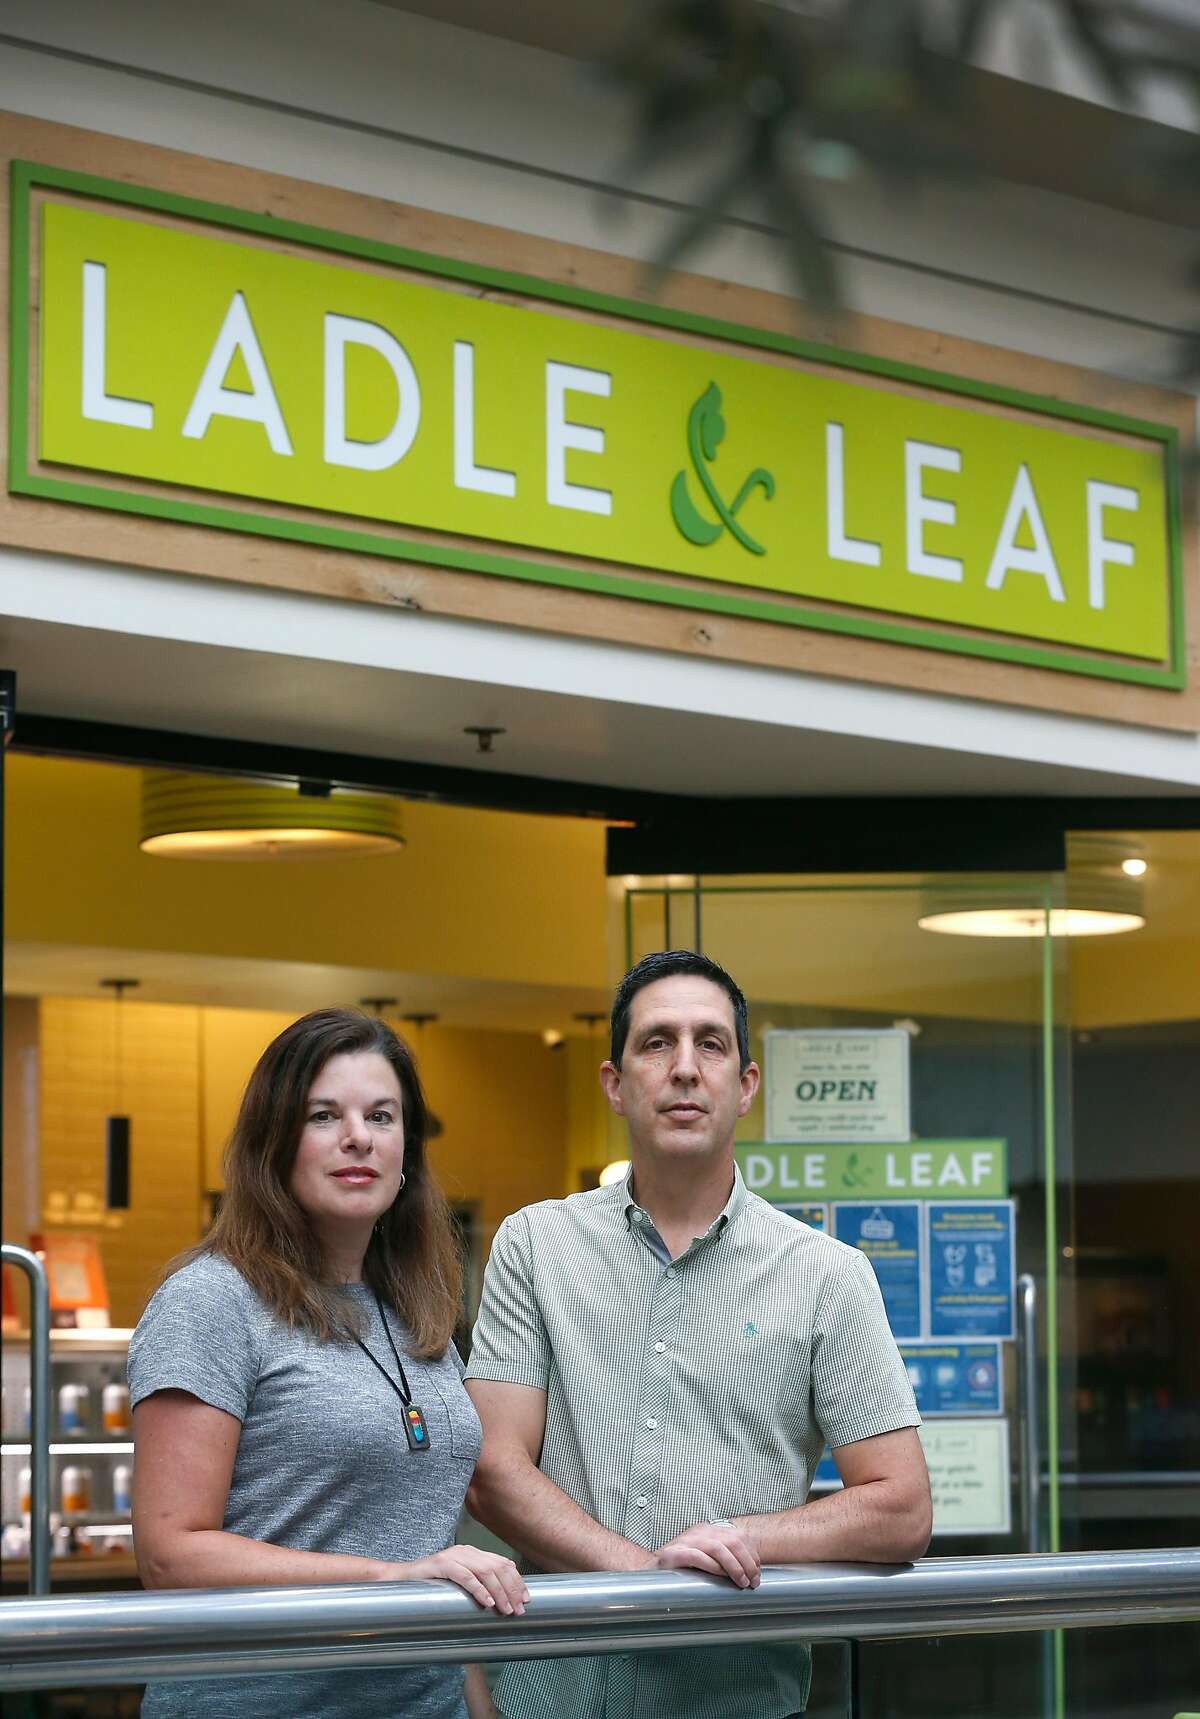 Business partners Jennifer Sarver and Steve Sarver prepare their Ladle and Leaf cafe and restaurant for lunch service in the Crocker Galleria mall in San Francisco, Calif. on Tuesday, Aug. 25, 2020. Some businesses have remained open despite few office workers and commuters populating the Financial District during the coronavirus shutdown.